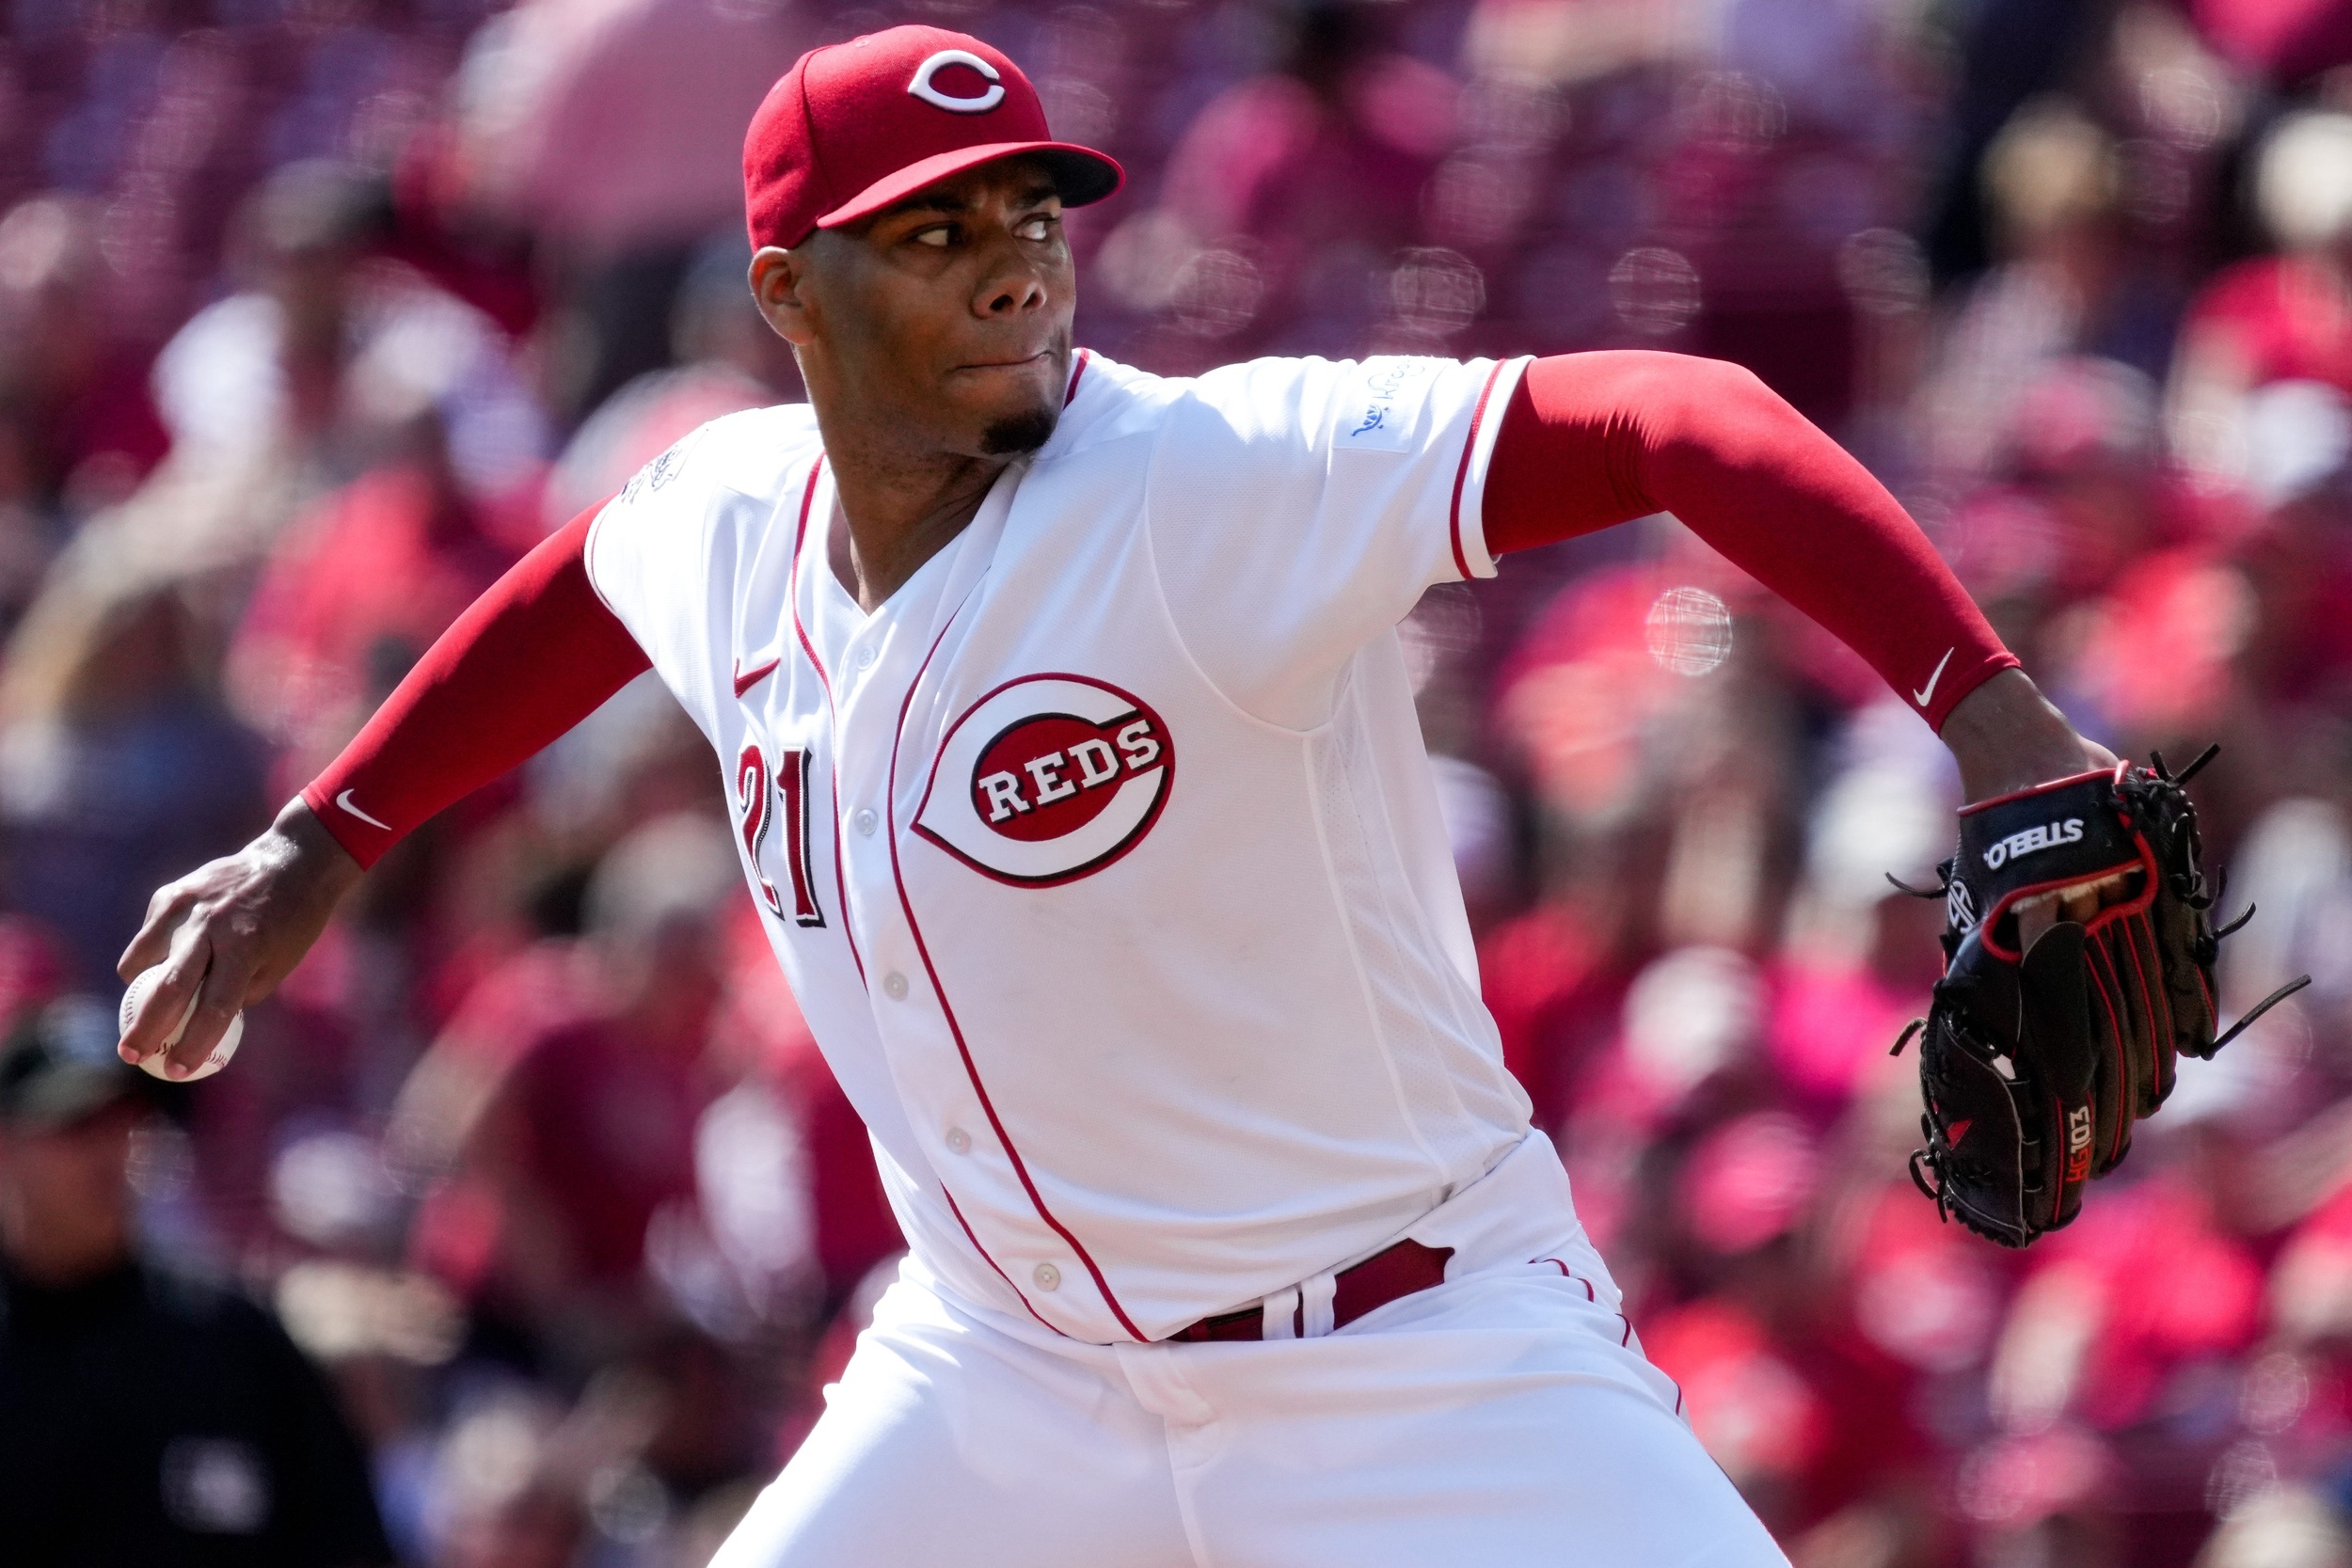 reds ace wants star infielder to pay for car damage